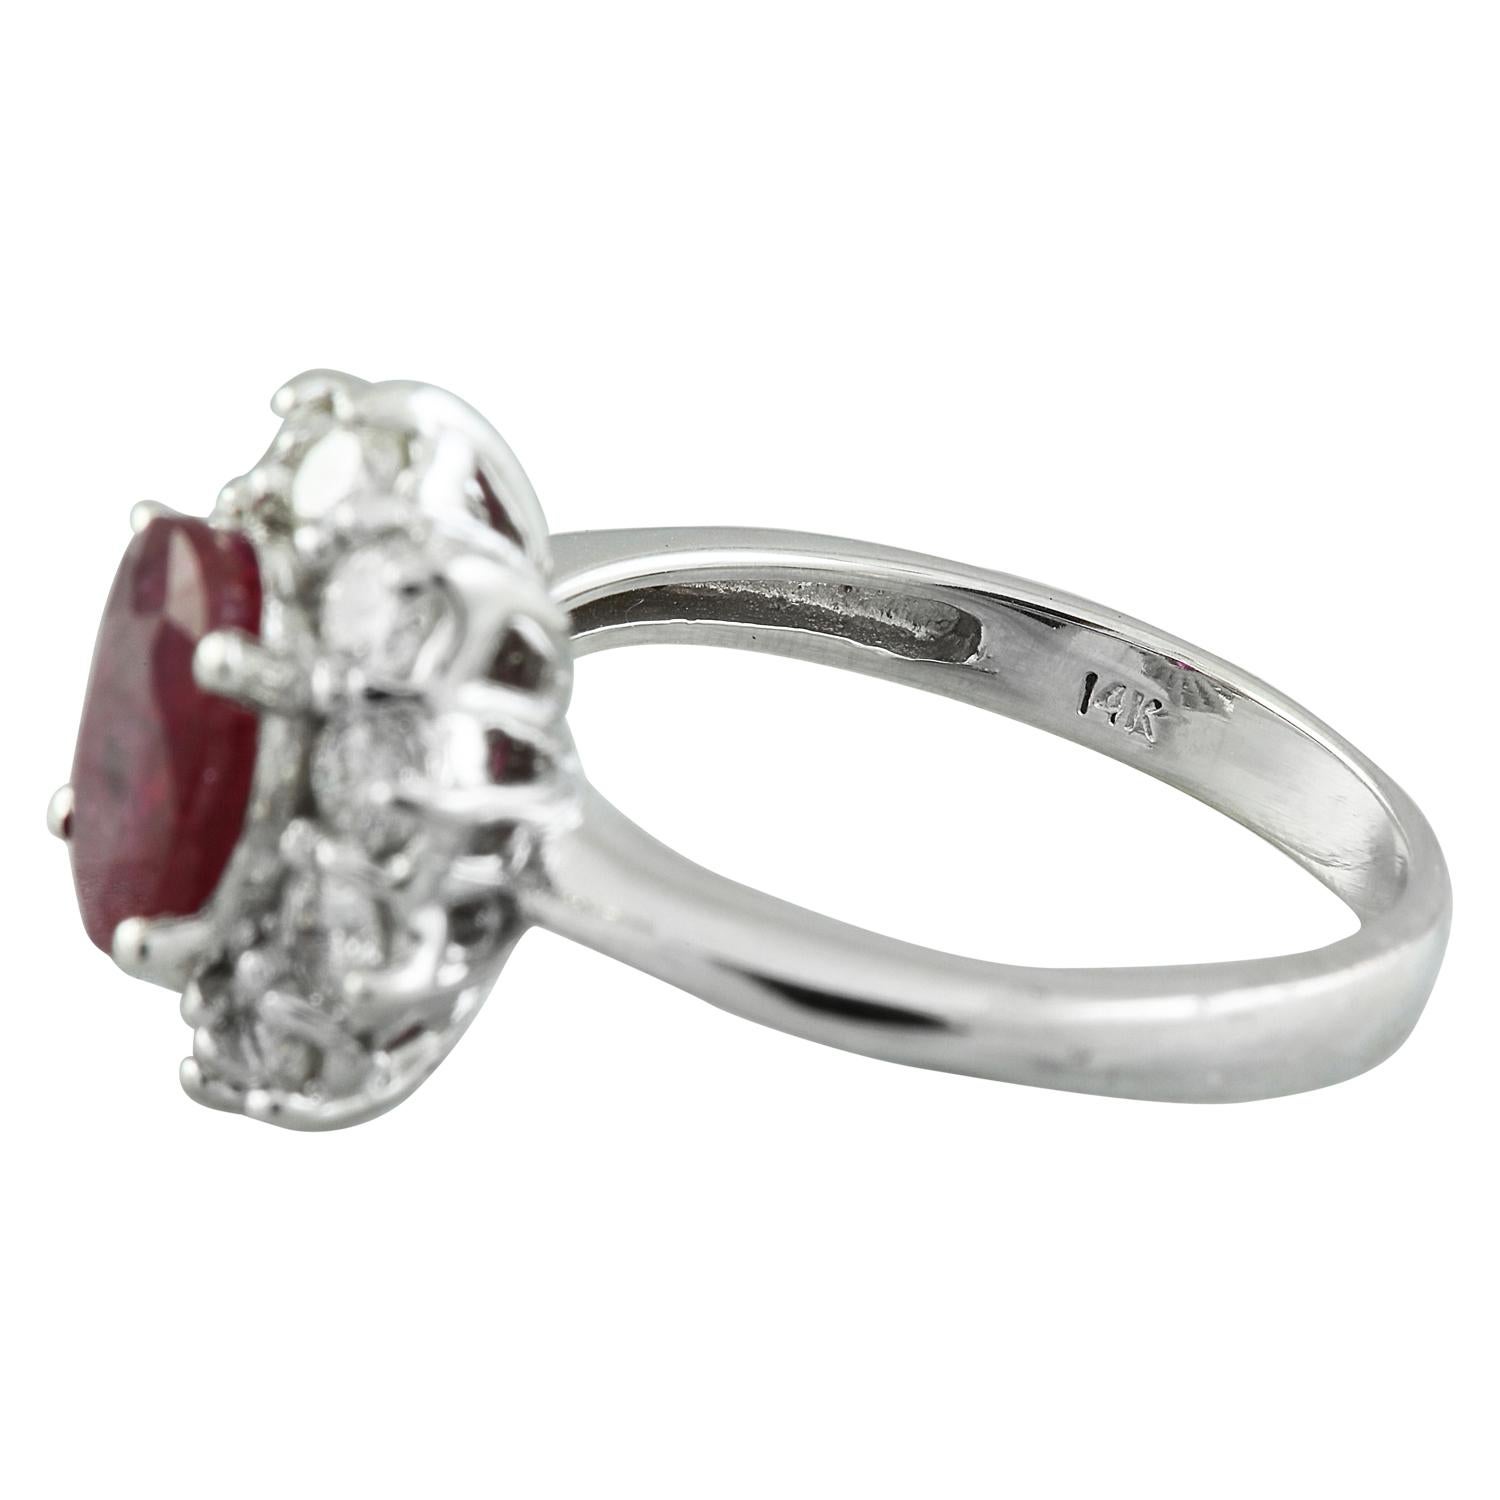 Oval Cut Ruby Diamond Ring In 14 Karat White Gold For Sale